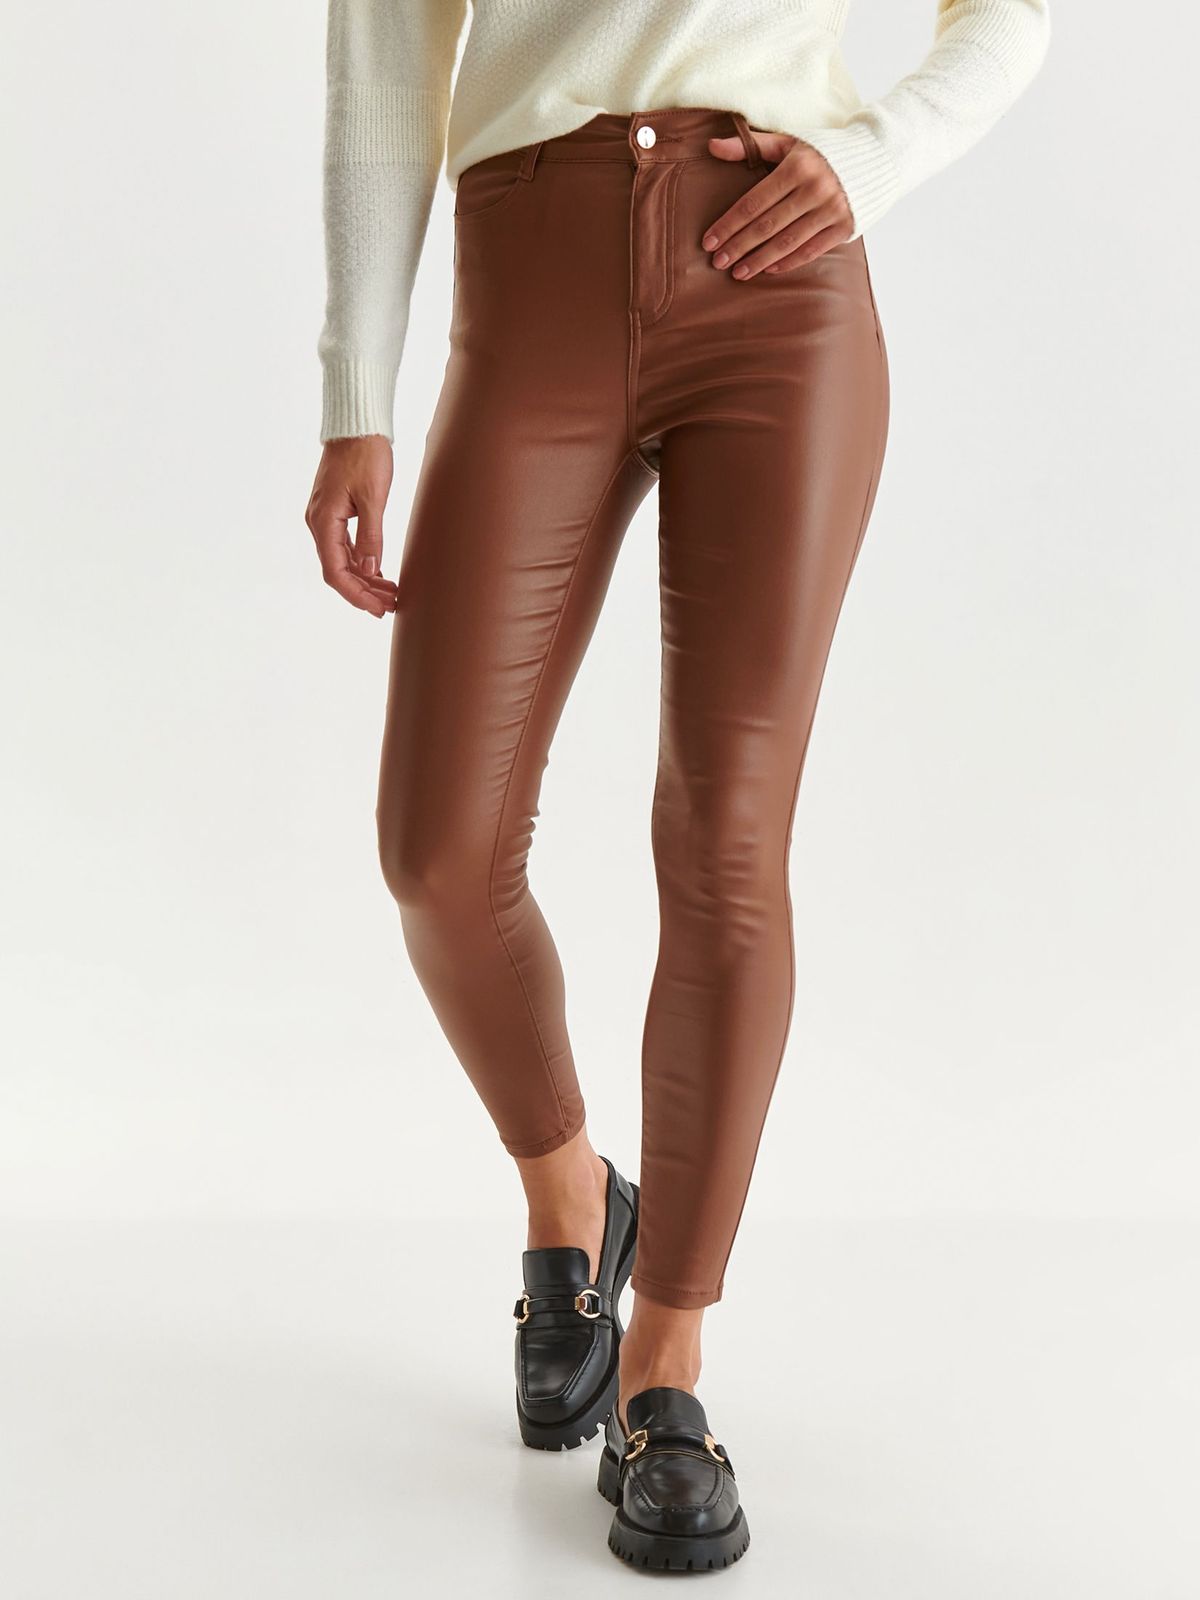 Lightbrown trousers conical from ecological leather